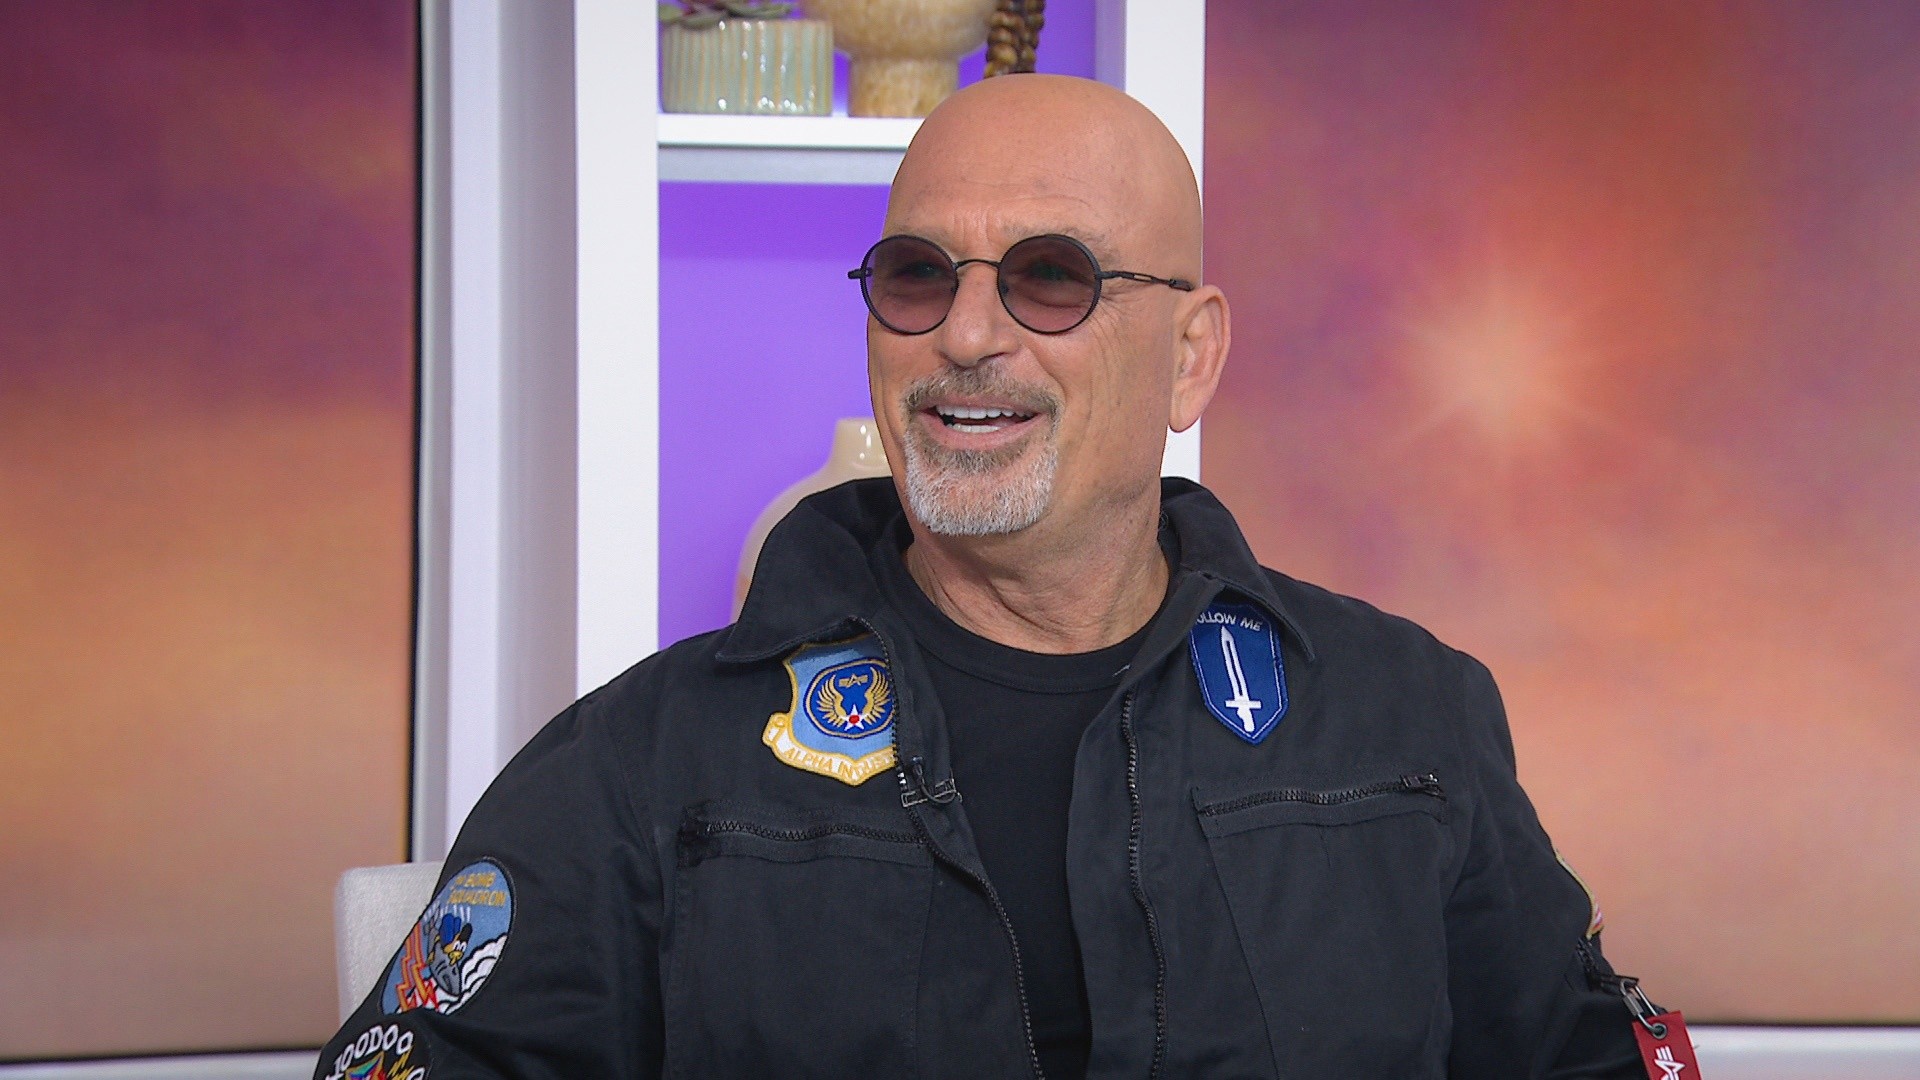 Howie Mandel says this season of 'AGT' is the 'most awe-inspiring'